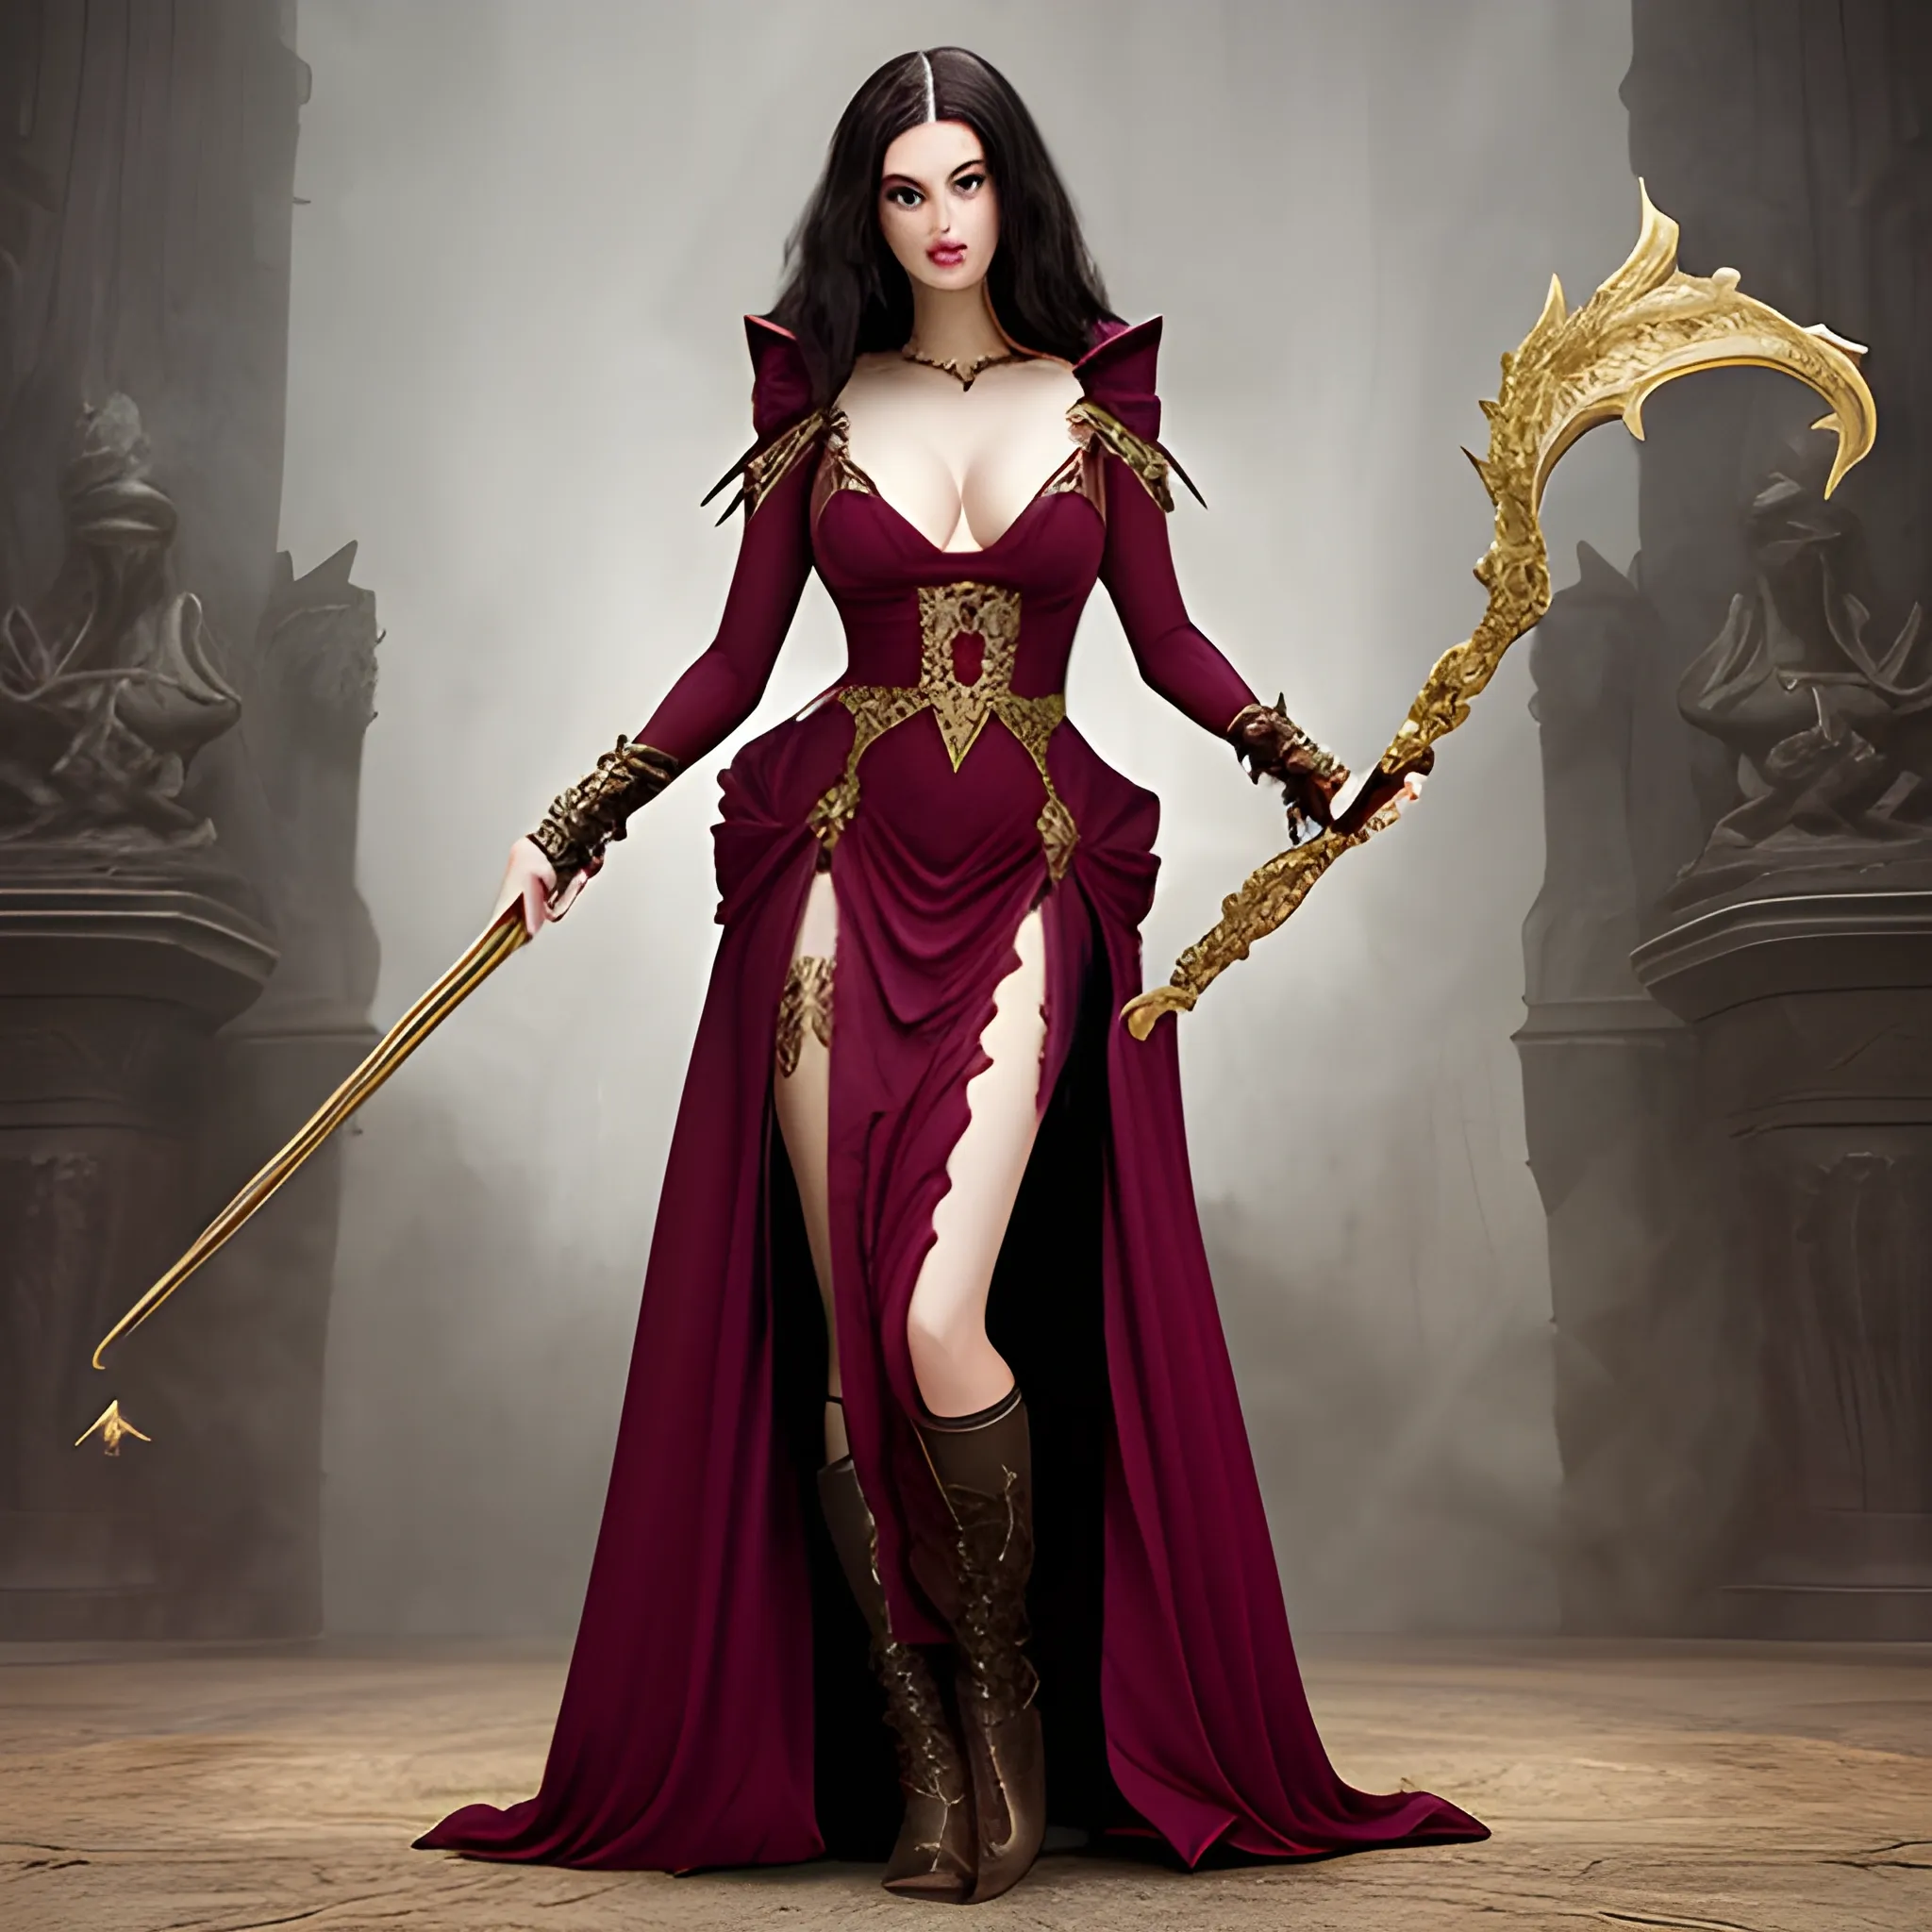 fantasy, evil sorceress, sexy maroon dress with gold accents and high slits, dark hair, holding staff